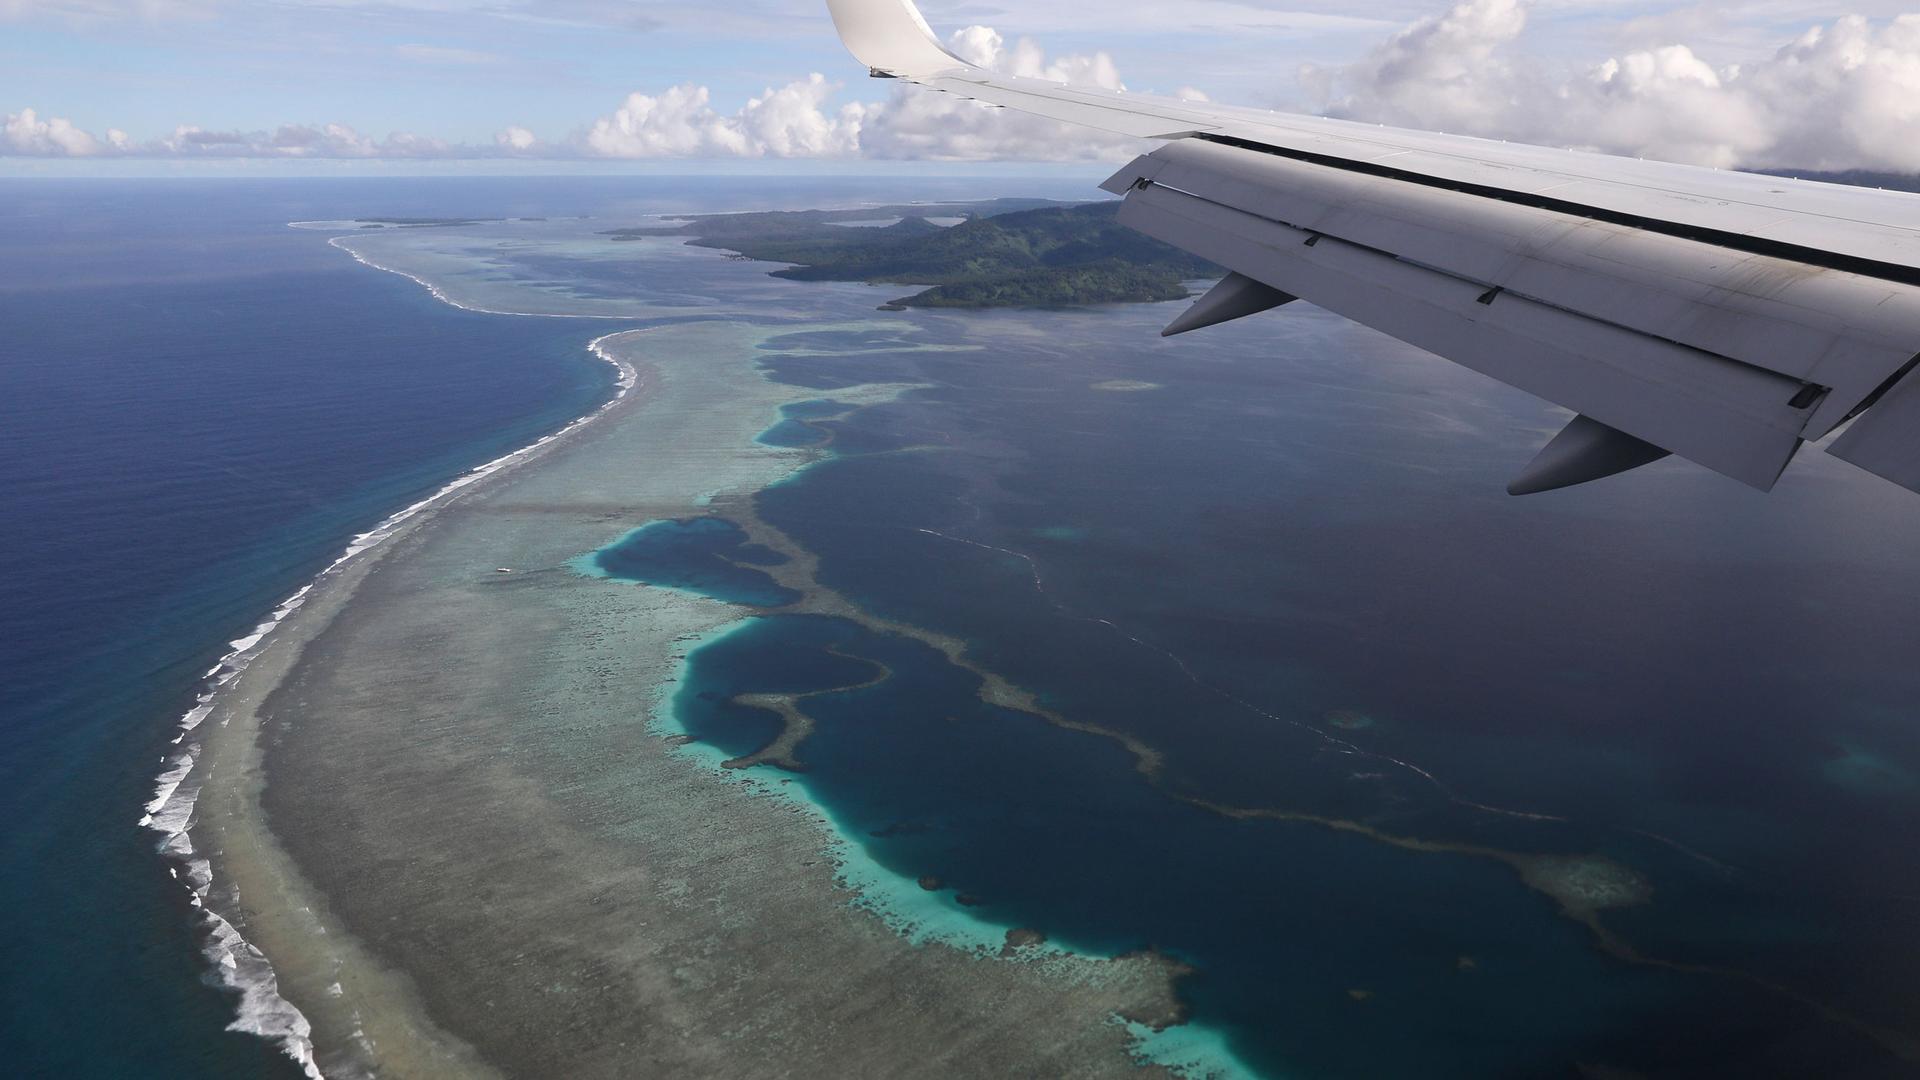 Former US Secretary of State Mike Pompeo's plane makes its landing approach on Pohnpei International Airport in Kolonia, Federated States of Micronesia, Monday, Aug. 5, 2019.